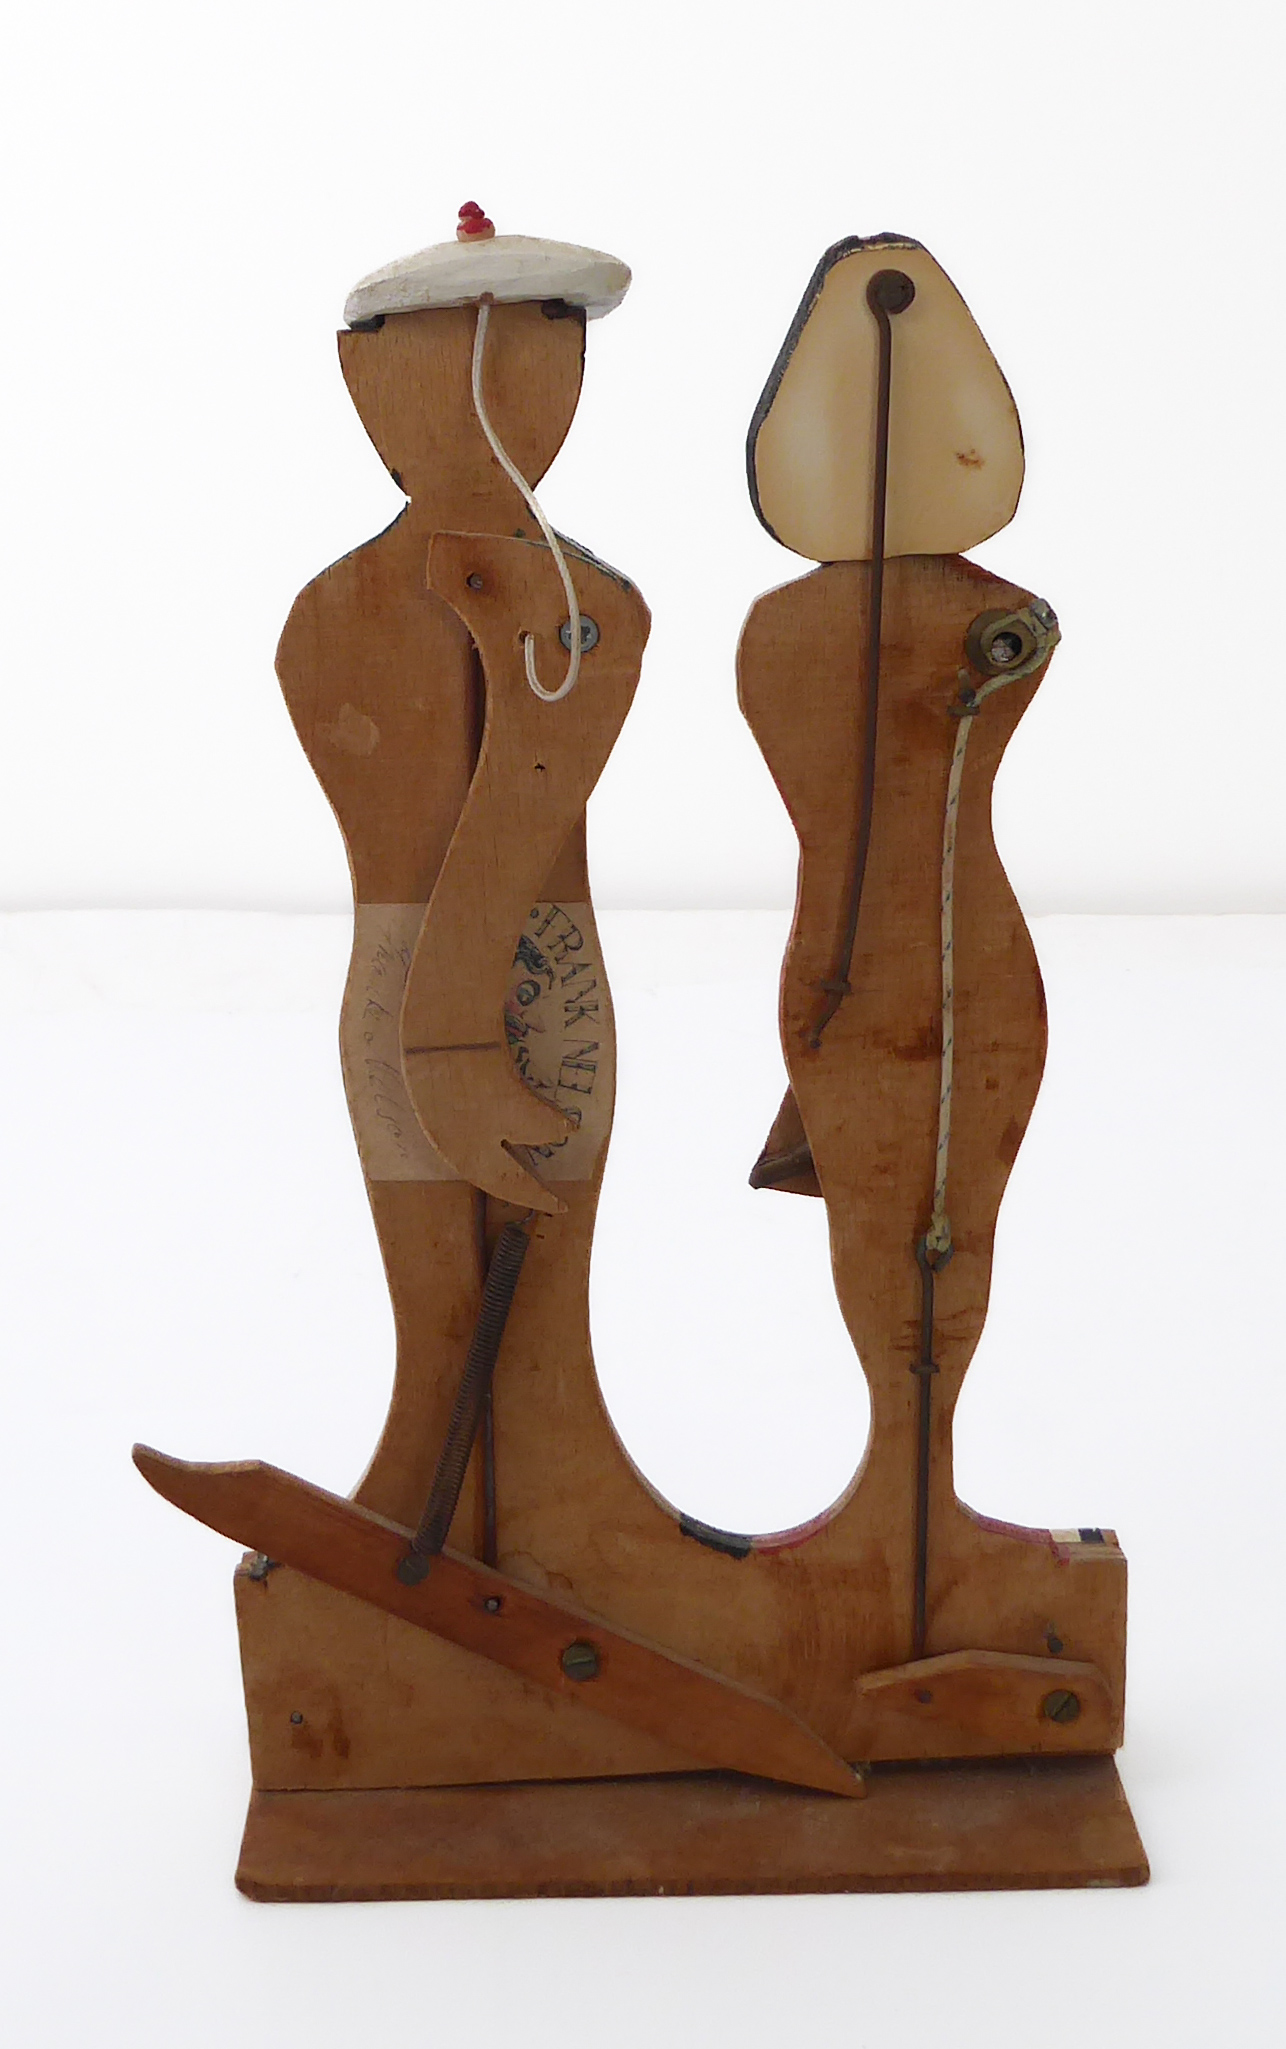 Frank Nelson (193-2012): a humorous risqué wooden automata - 'TheGotchagot', depicting a sailor - Image 4 of 4